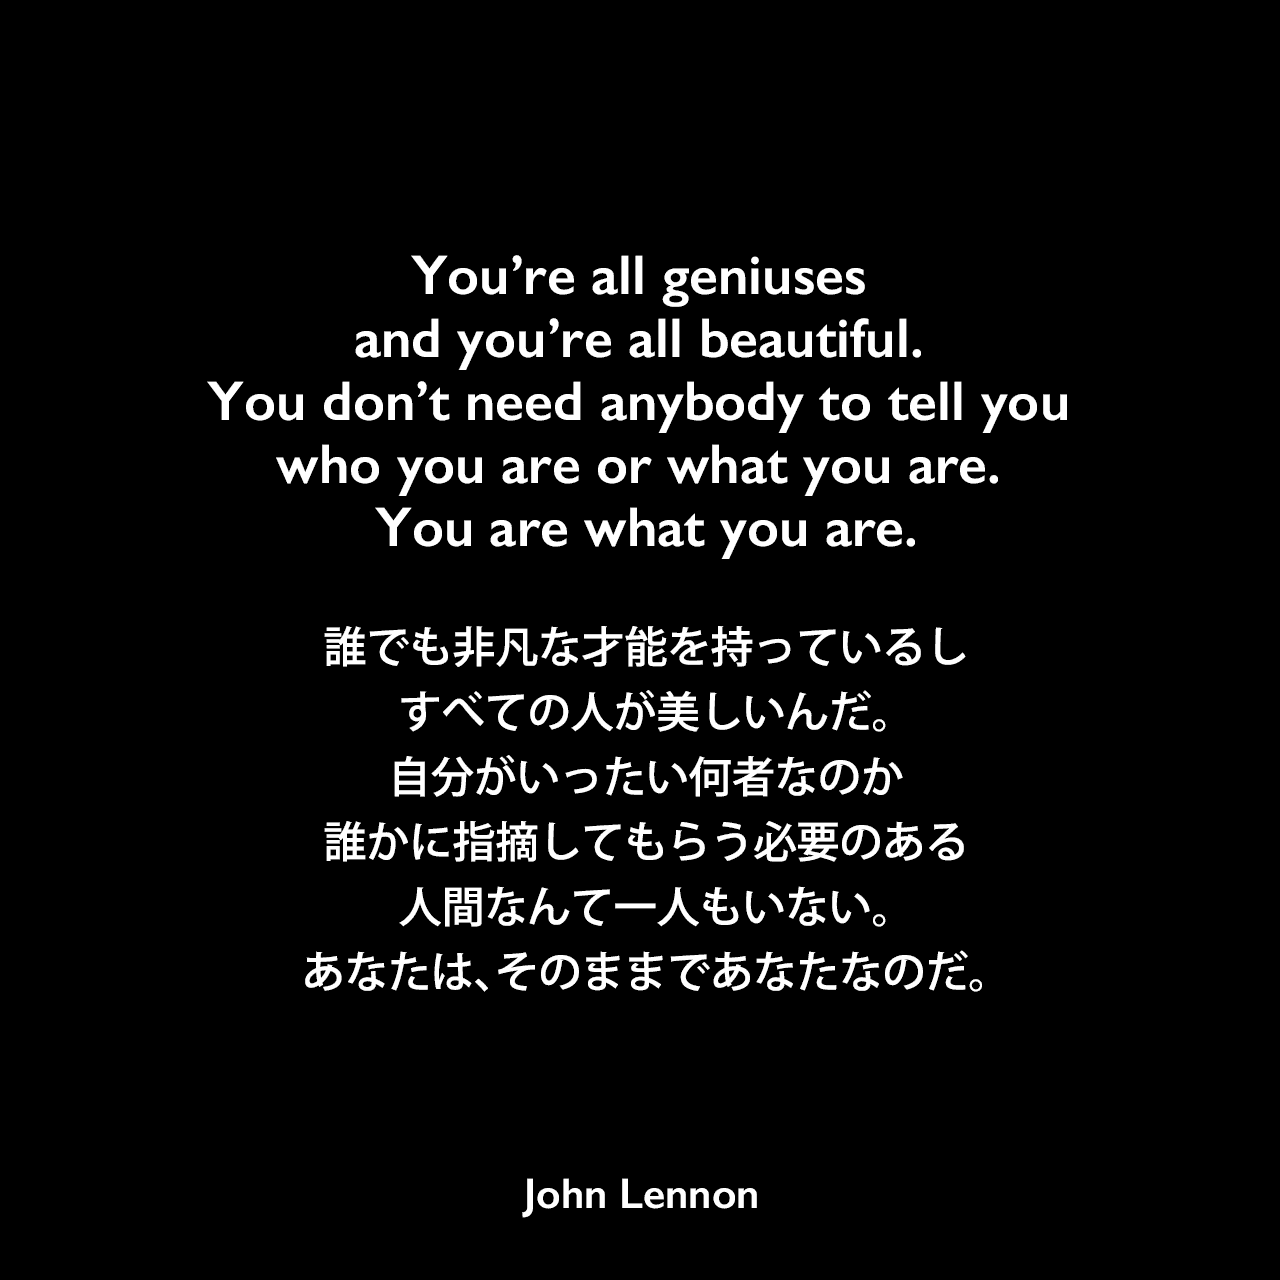 You’re all geniuses and you’re all beautiful. You don’t need anybody to tell you who you are or what you are. You are what you are.誰でも非凡な才能を持っているし、すべての人が美しいんだ。自分がいったい何者なのか、誰かに指摘してもらう必要のある人間なんて一人もいない。あなたは、そのままであなたなのだ。- 1969年7月のプレス発表会のコメントJohn Lennon